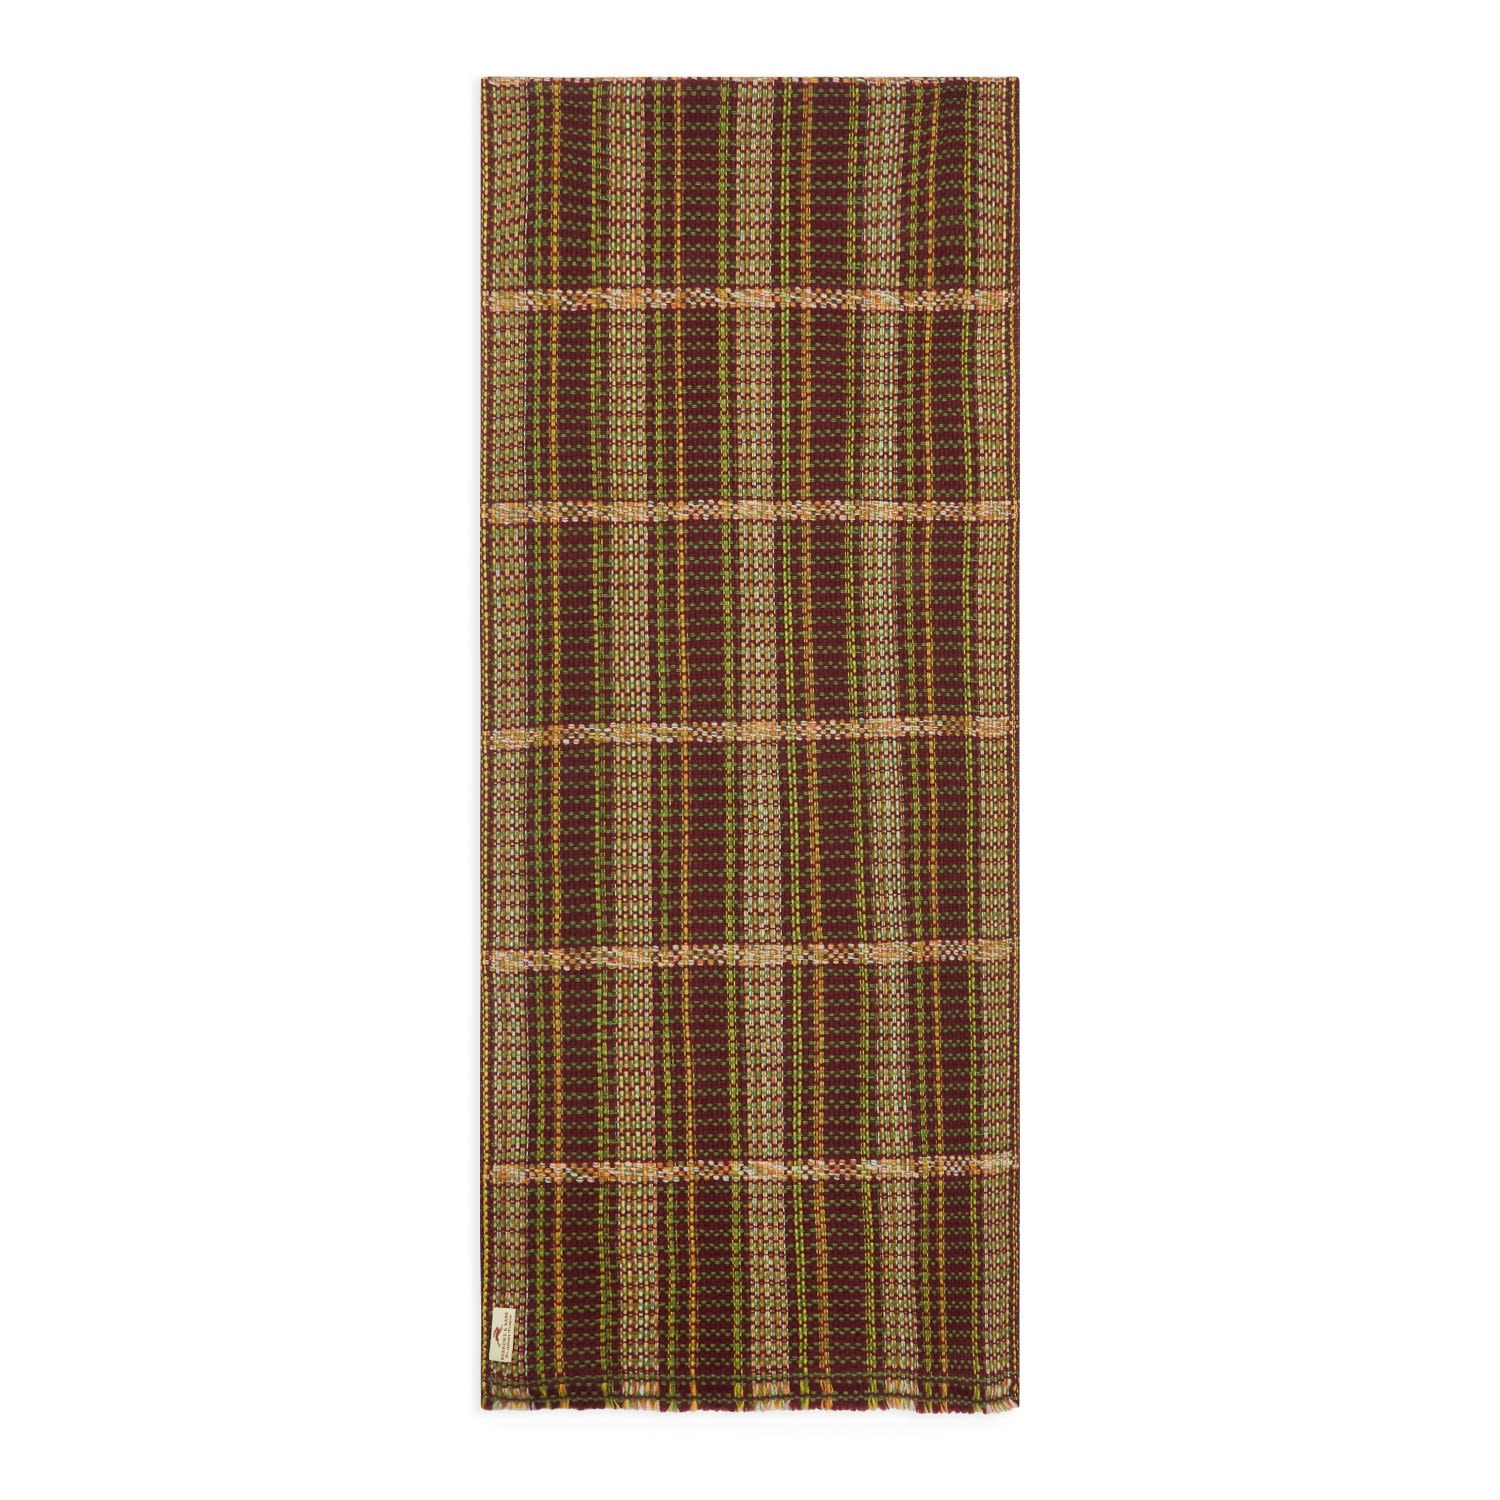 Shop Burrows And Hare Men's Cashmere & Merino Wool Scarf - Stitched Brown